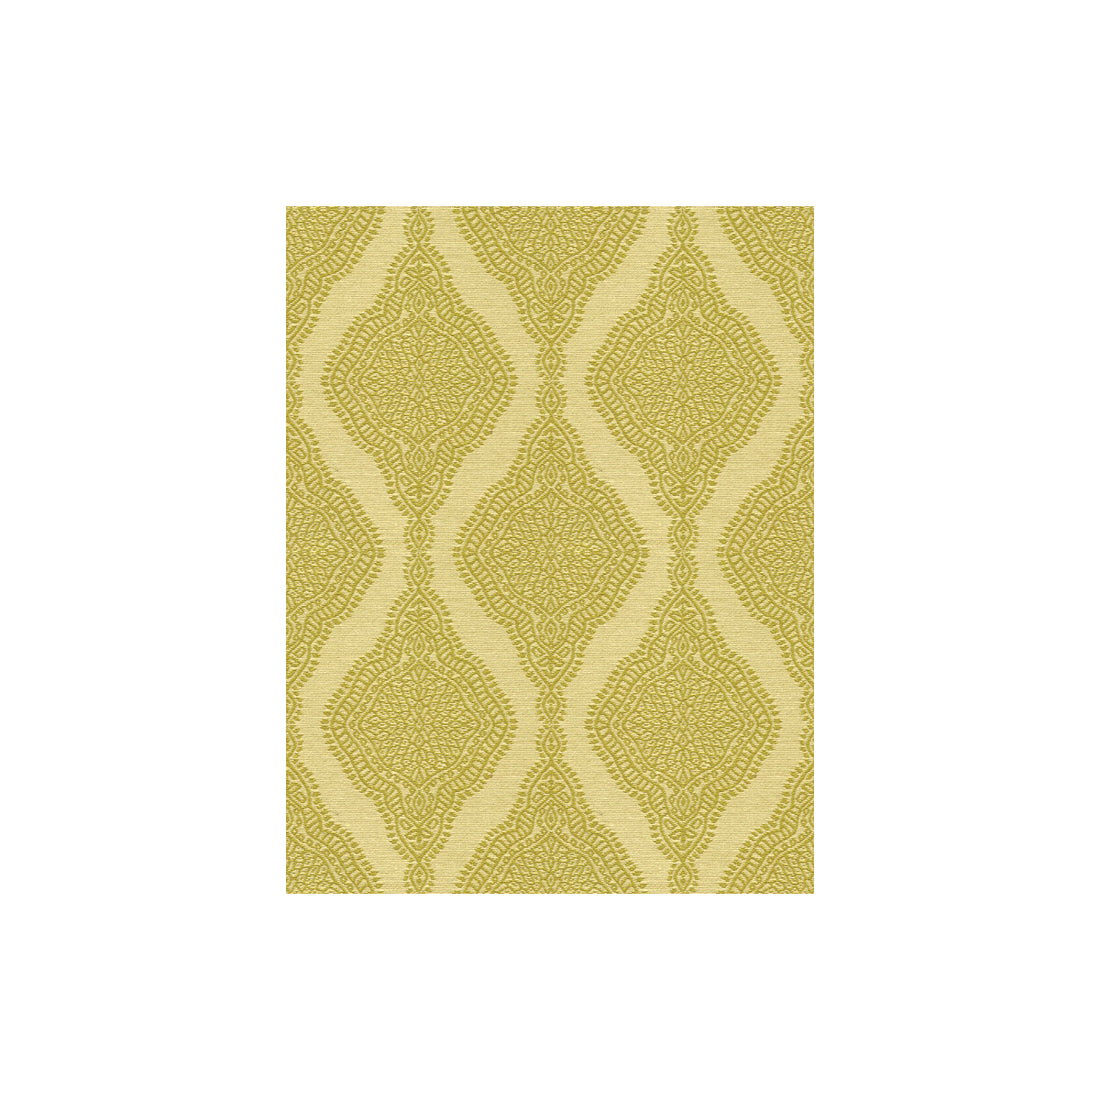 Liliana fabric in pear color - pattern 32935.3.0 - by Kravet Contract in the Contract Gis collection